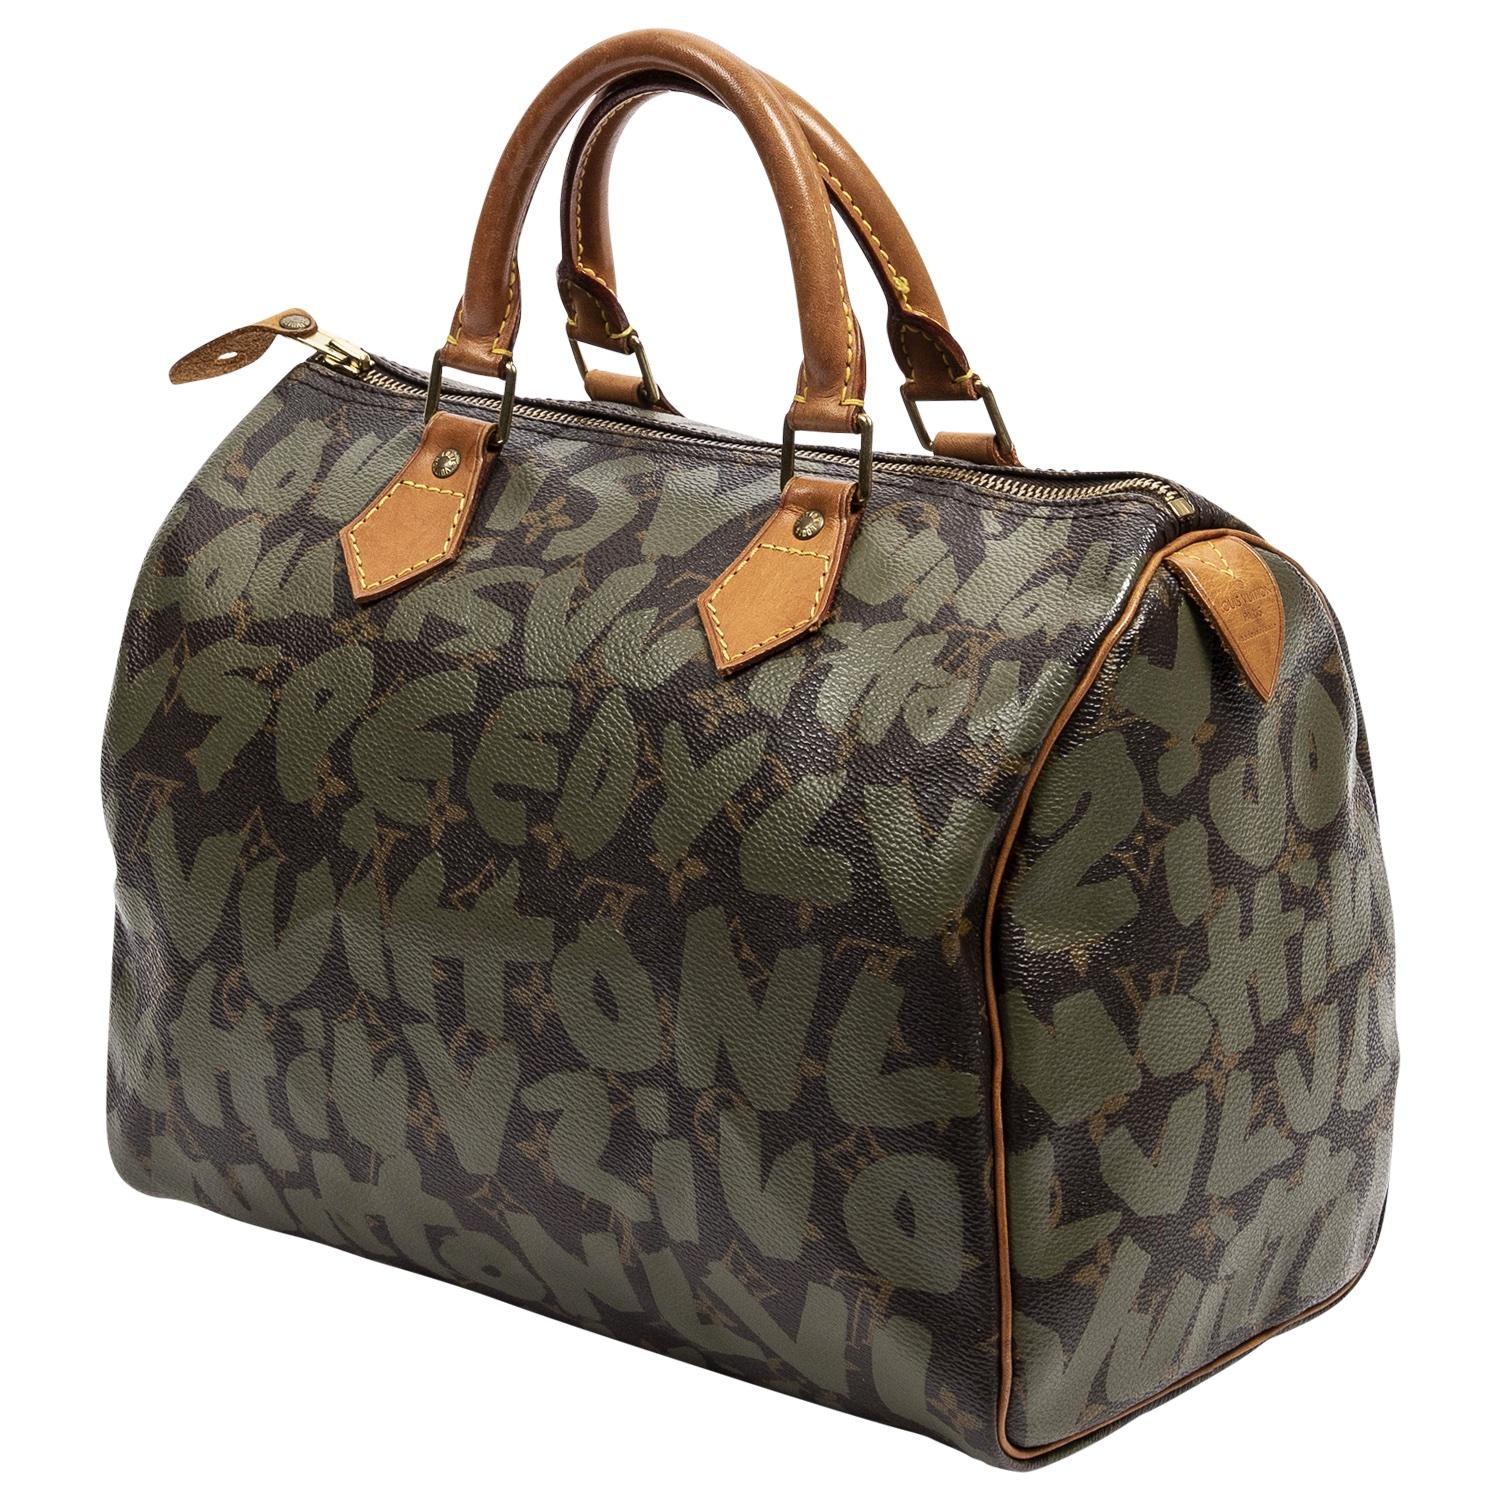 An iconic collab between the legendary Stephen Sprouse and Louis Vuitton. This 2001 beauty is detailed in brown coated canvas with green monogram graffiti, golden brass hardware, dual leather rolled top handles and leather trim. The zipped closure